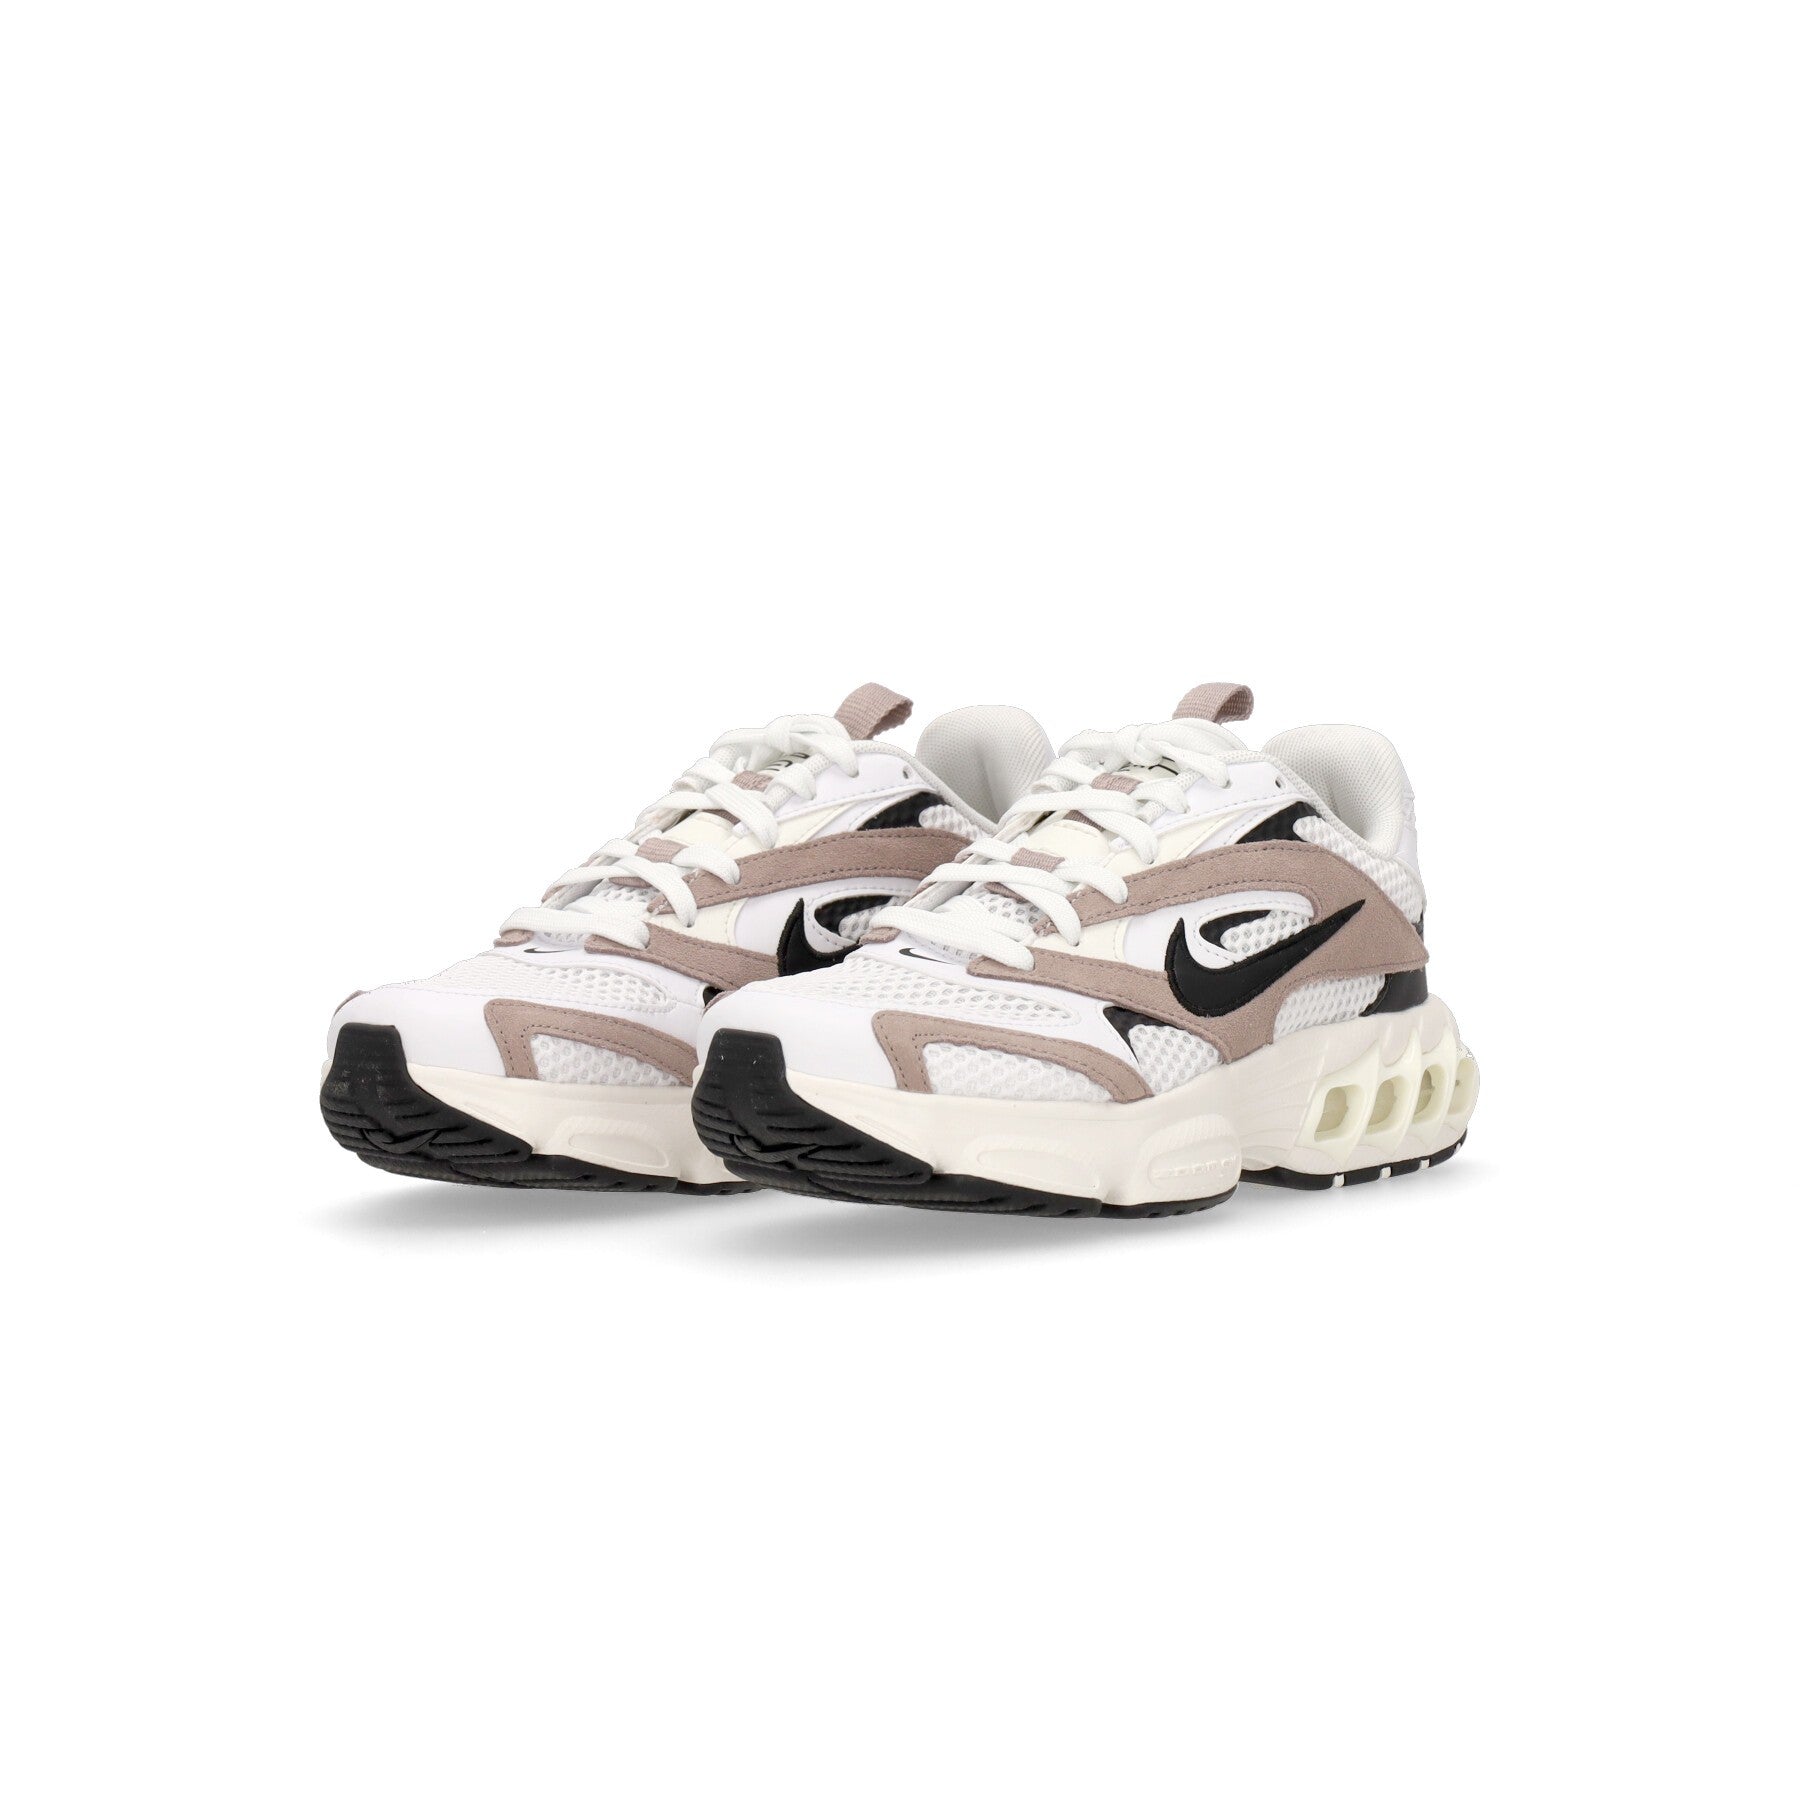 Nike, Scarpa Bassa Donna Wmns Air Zoom Fire, White/black/sail/diffused Taupe